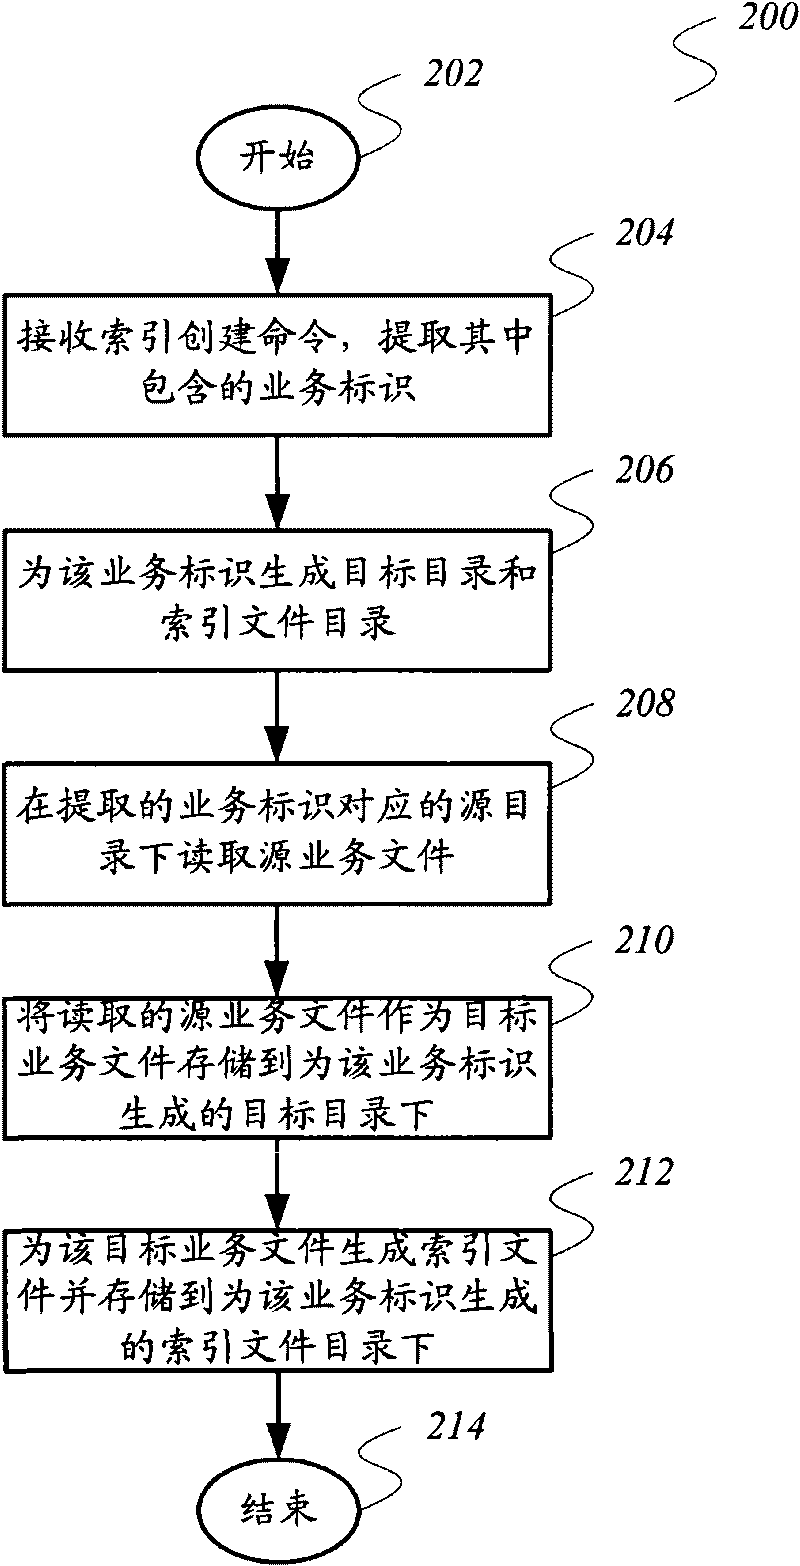 Index file creation synchronized method and search system